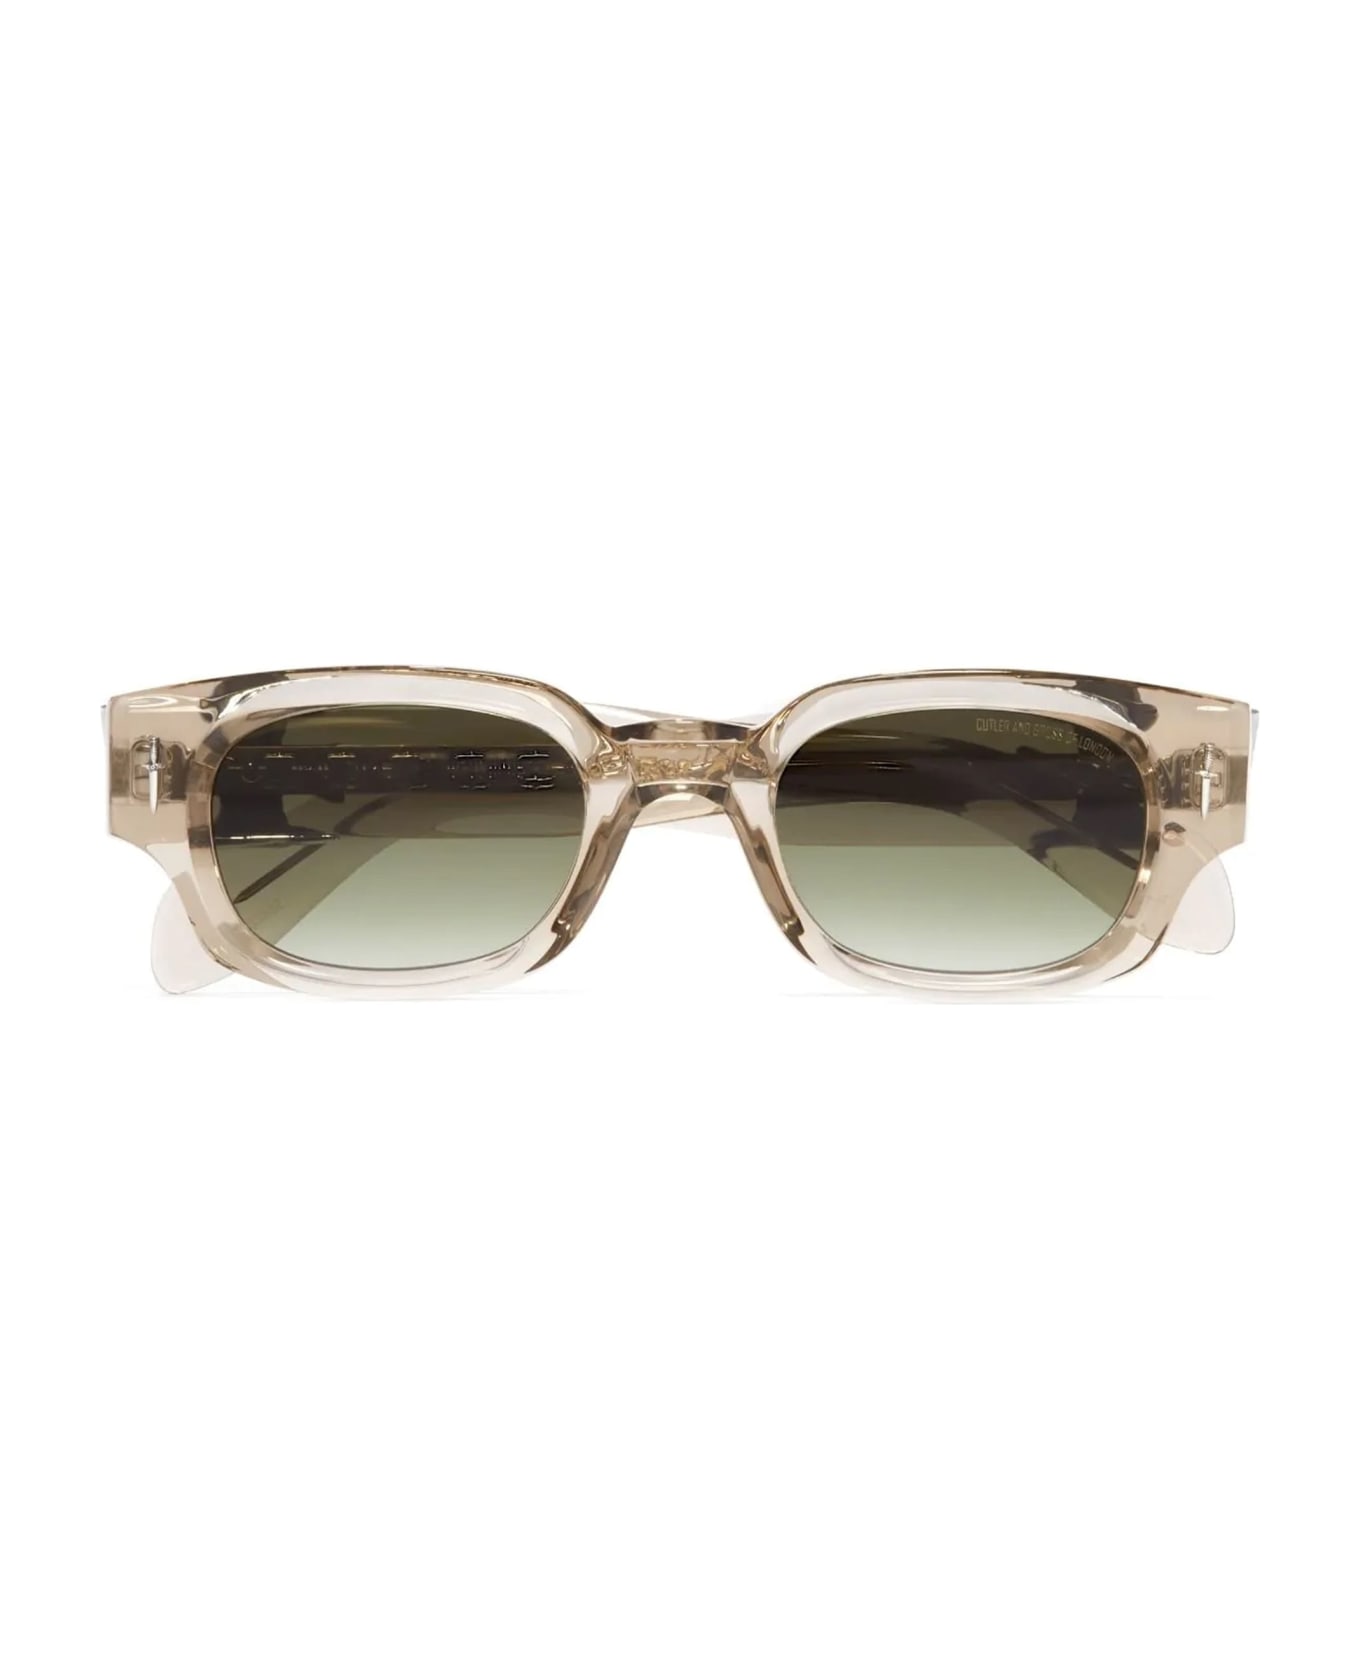 Cutler and Gross The Great Frog - Soaring Eagle / Sand Crystal Sunglasses - transparent beige